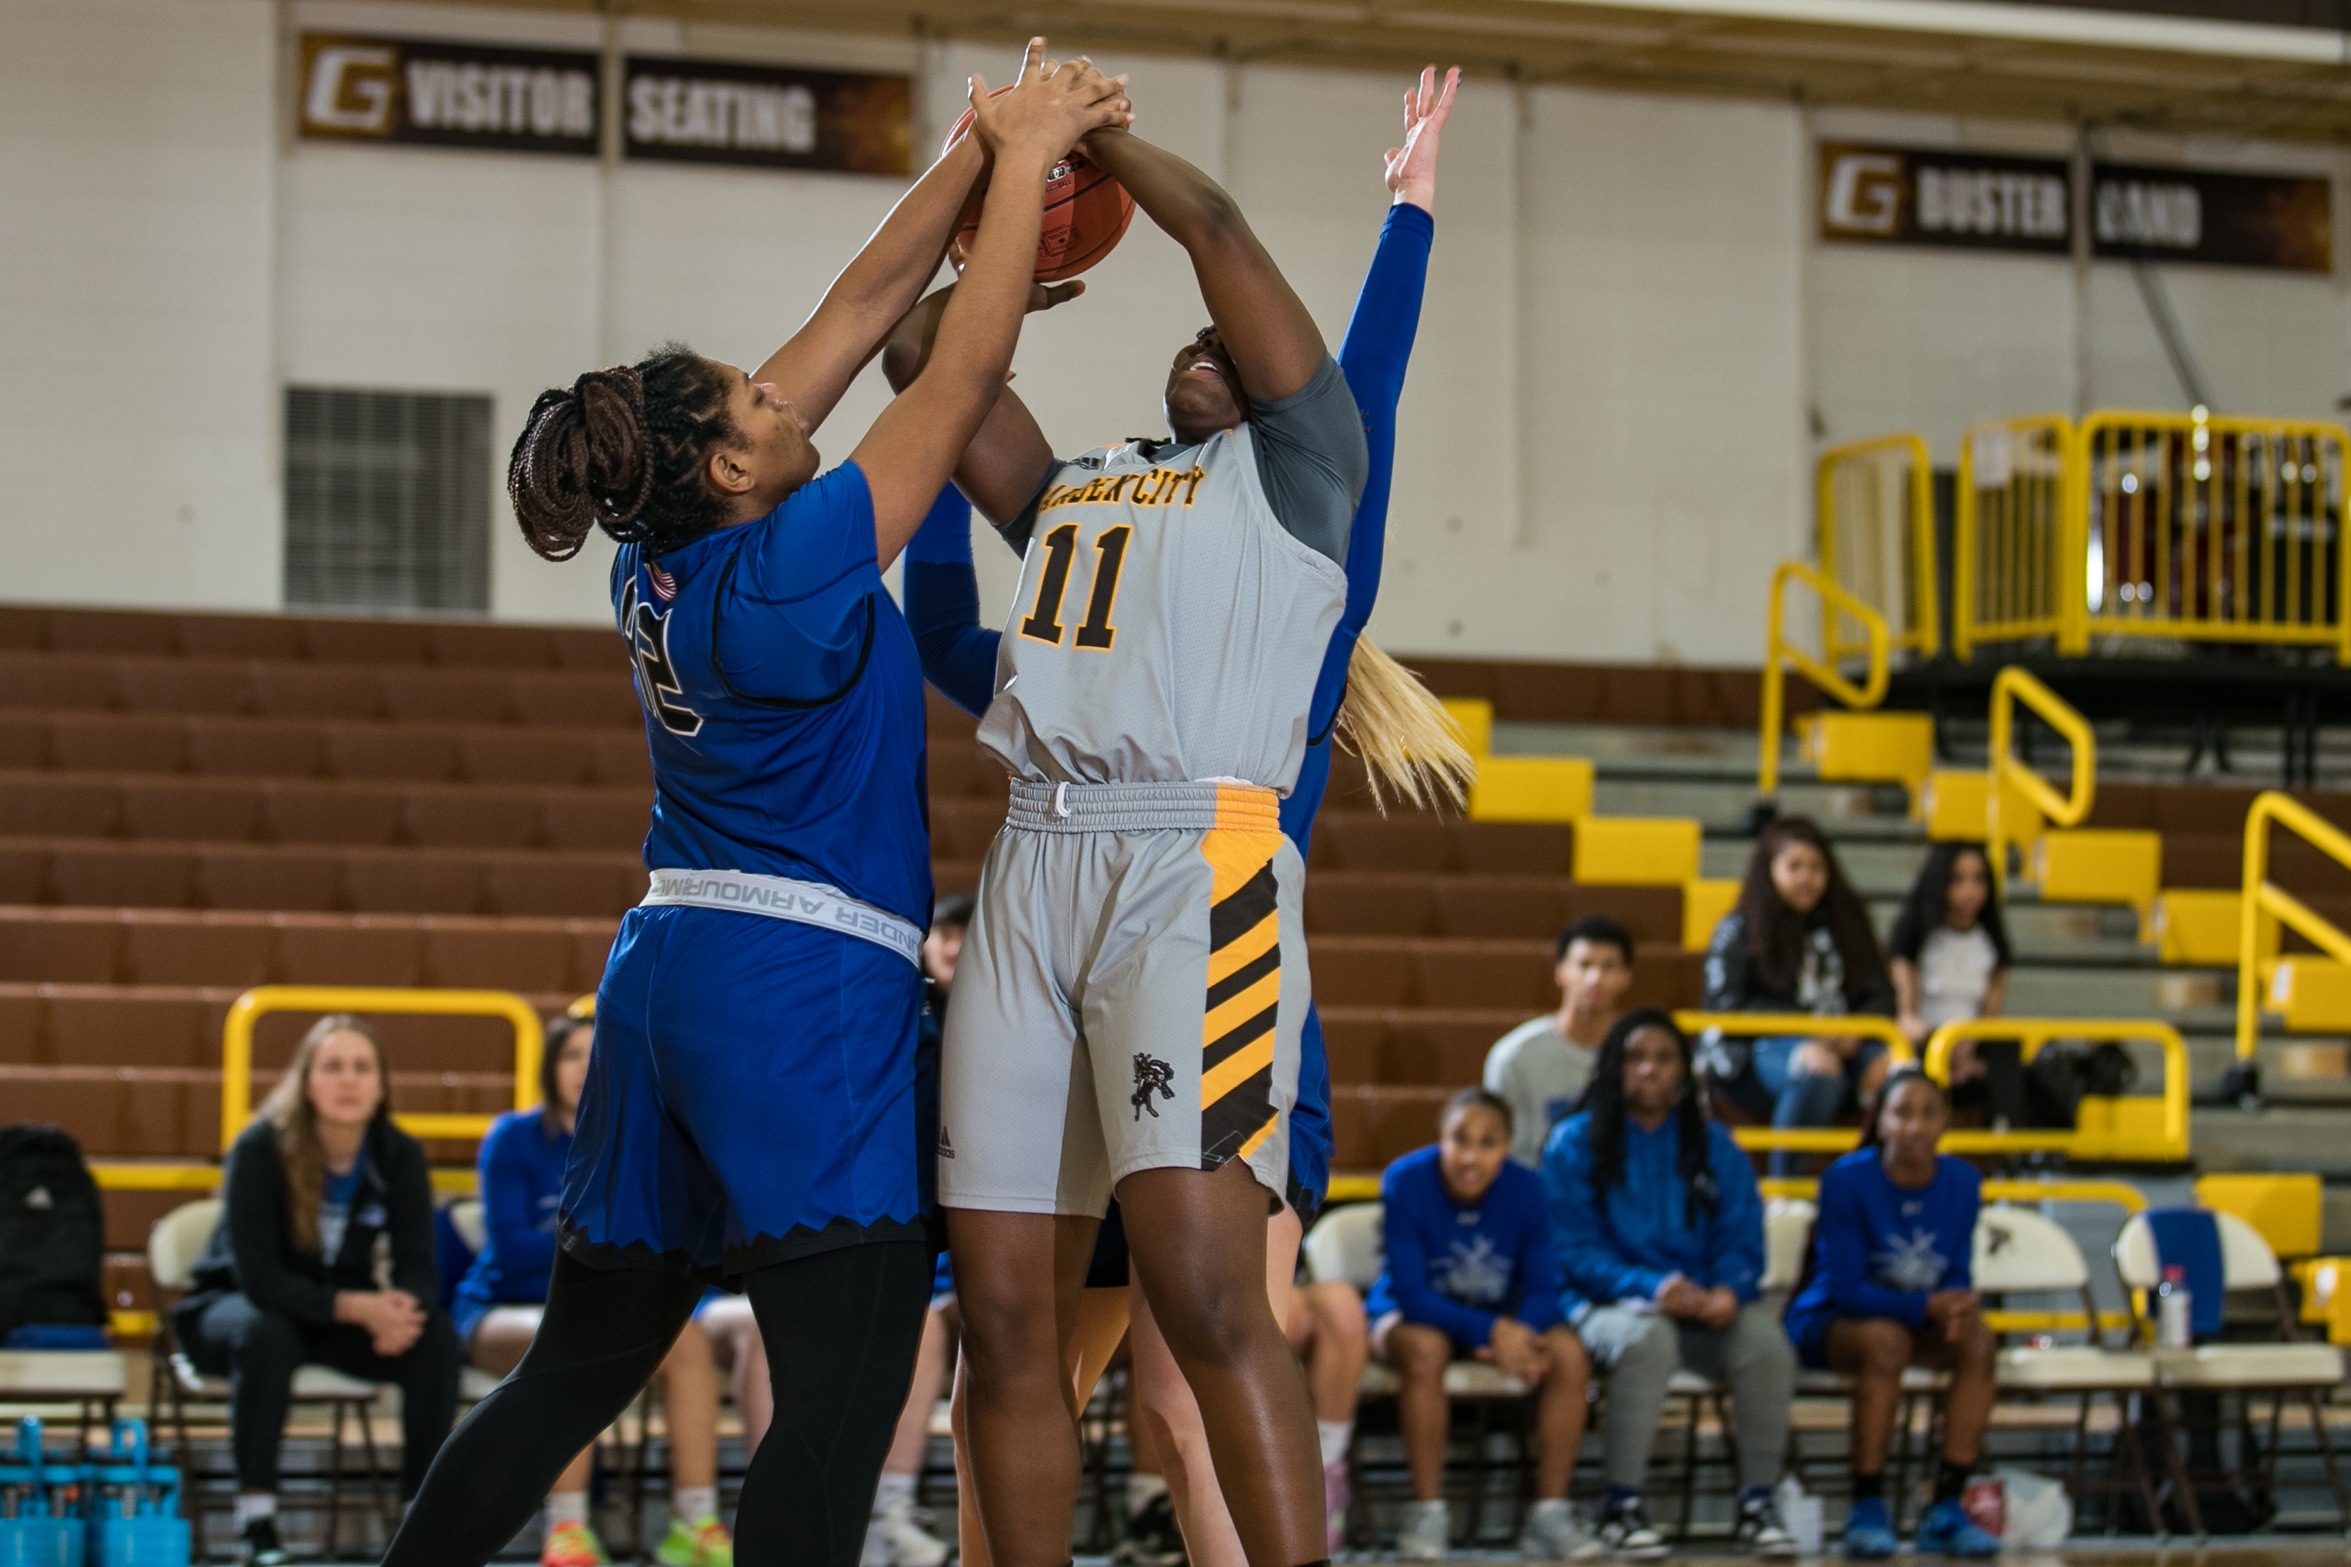 Broncbusters fall despite Black's 25-point outburst